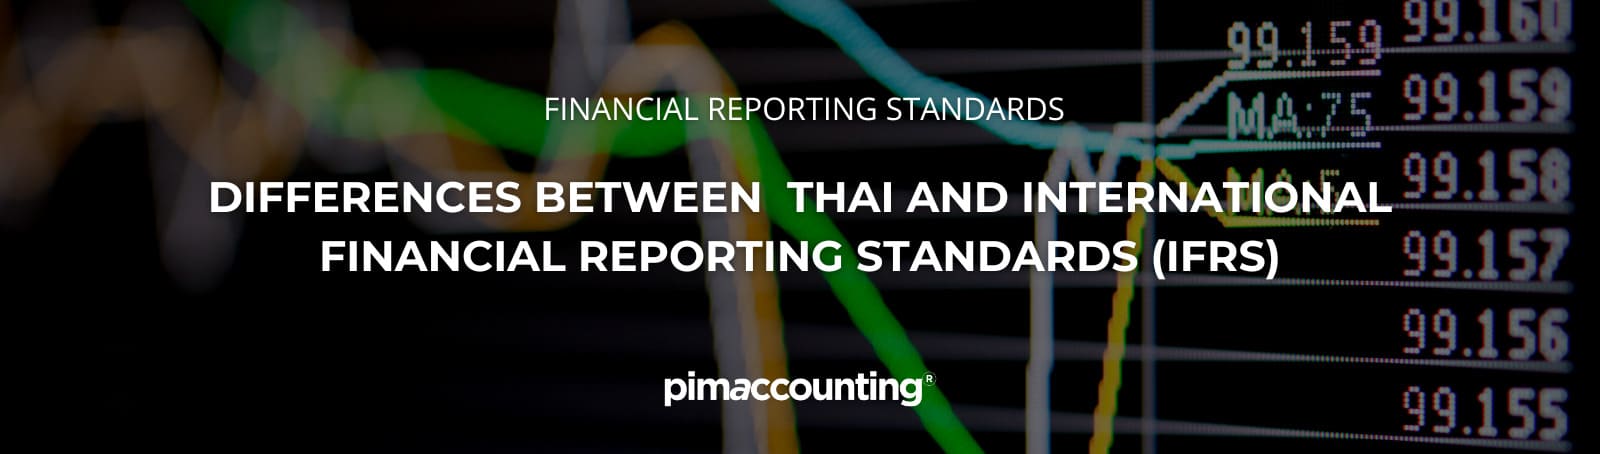 Differences between Thai and International Financial Reporting Standards (IFRS)